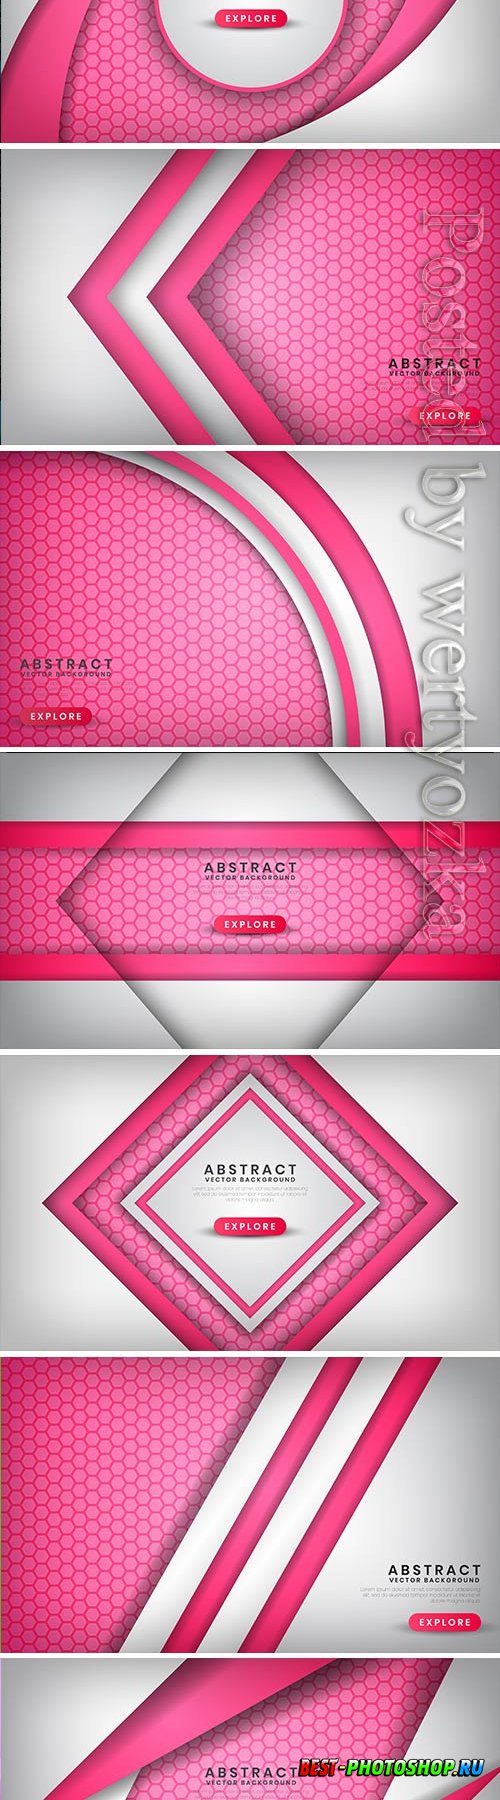 Abstract luxury white and pink background with hexagon patterns